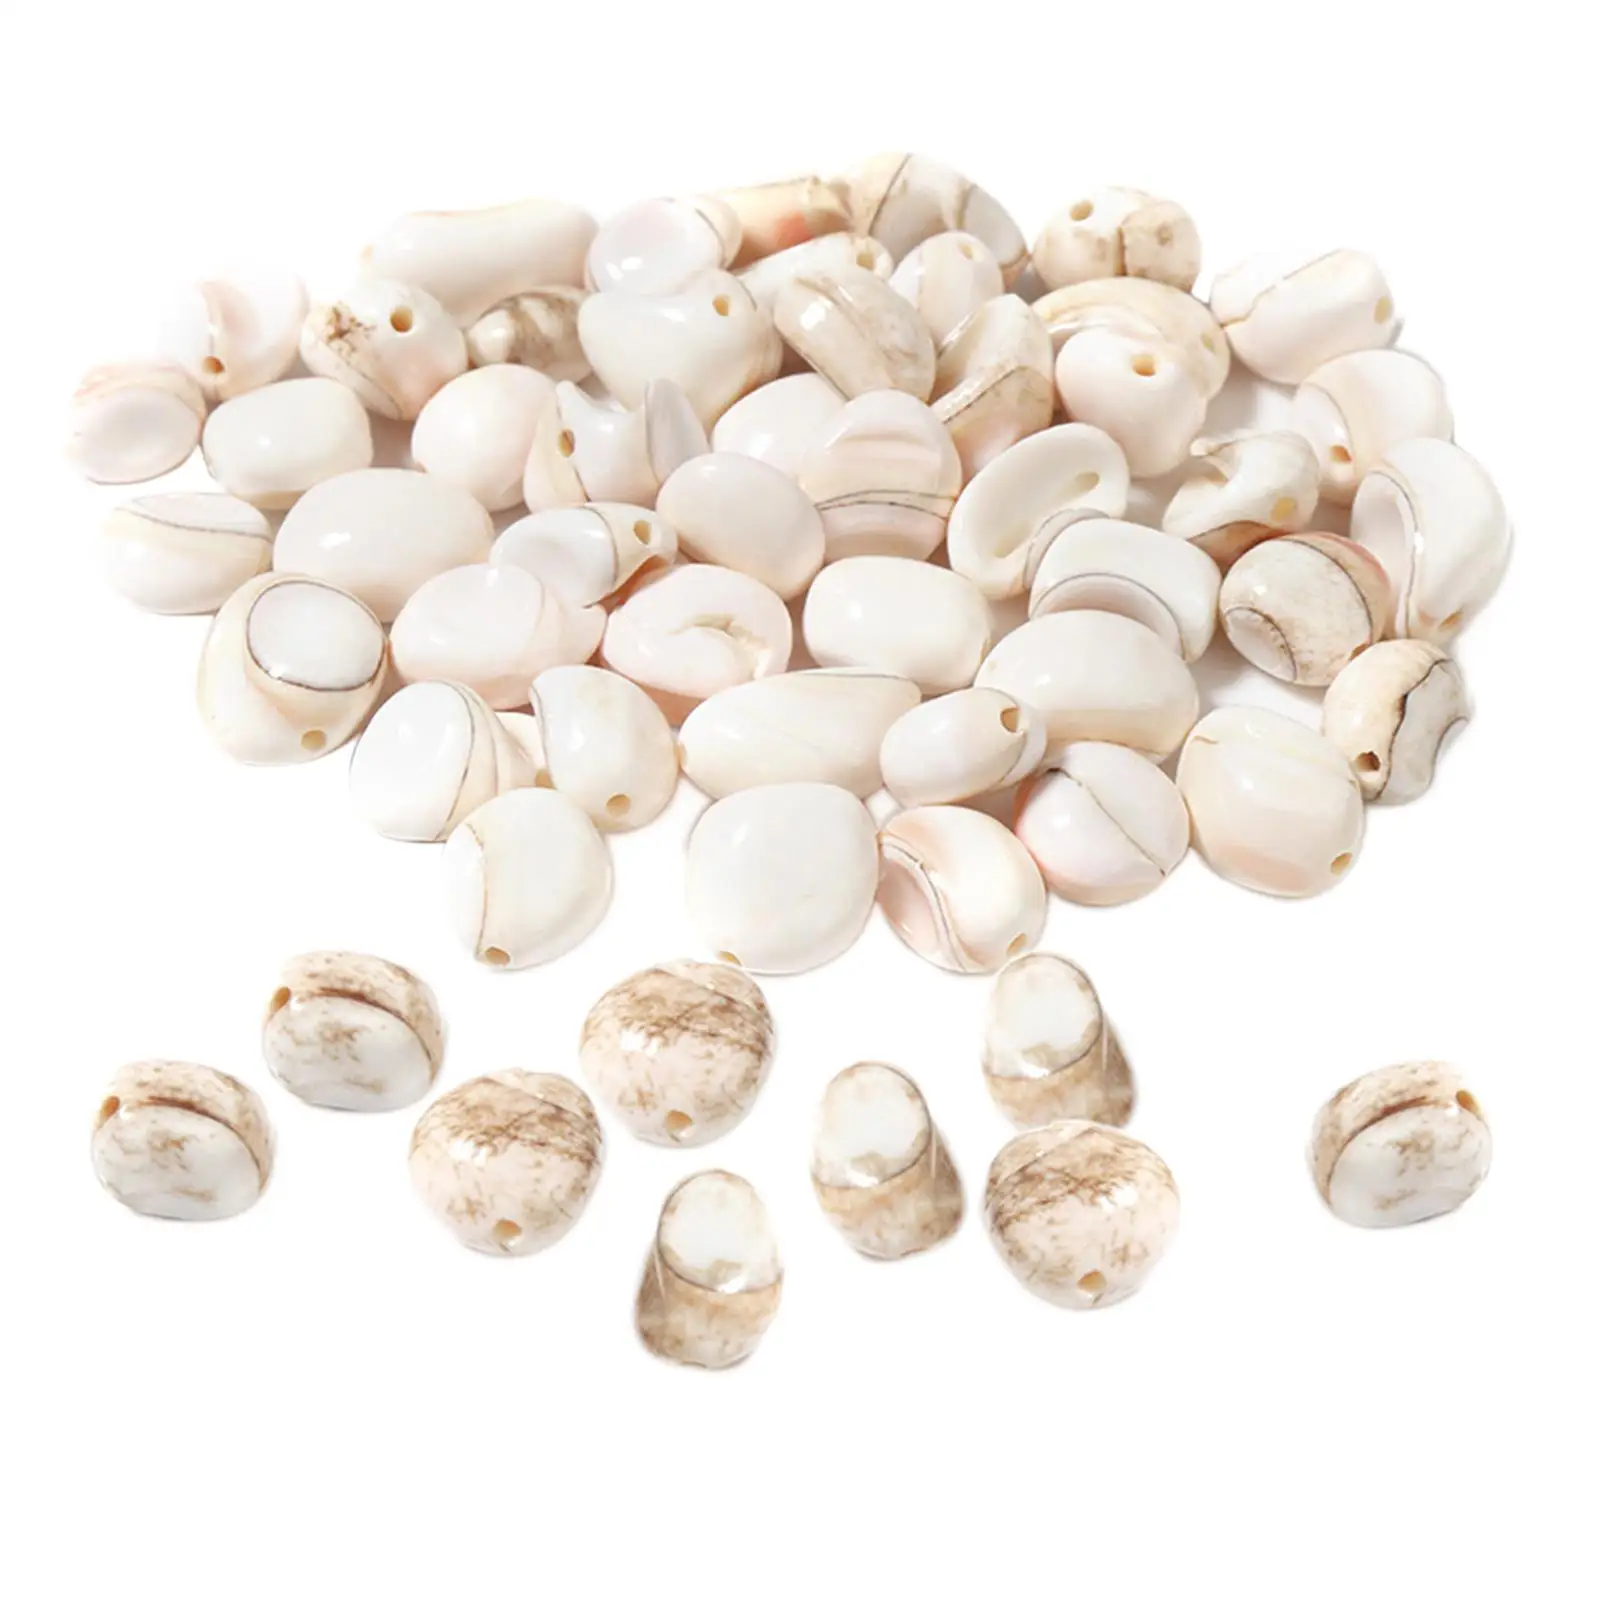 130Pcs Shells Ocean Beach Theme Jewelry Making Supplies for Foot Chains Home Decor Gifts